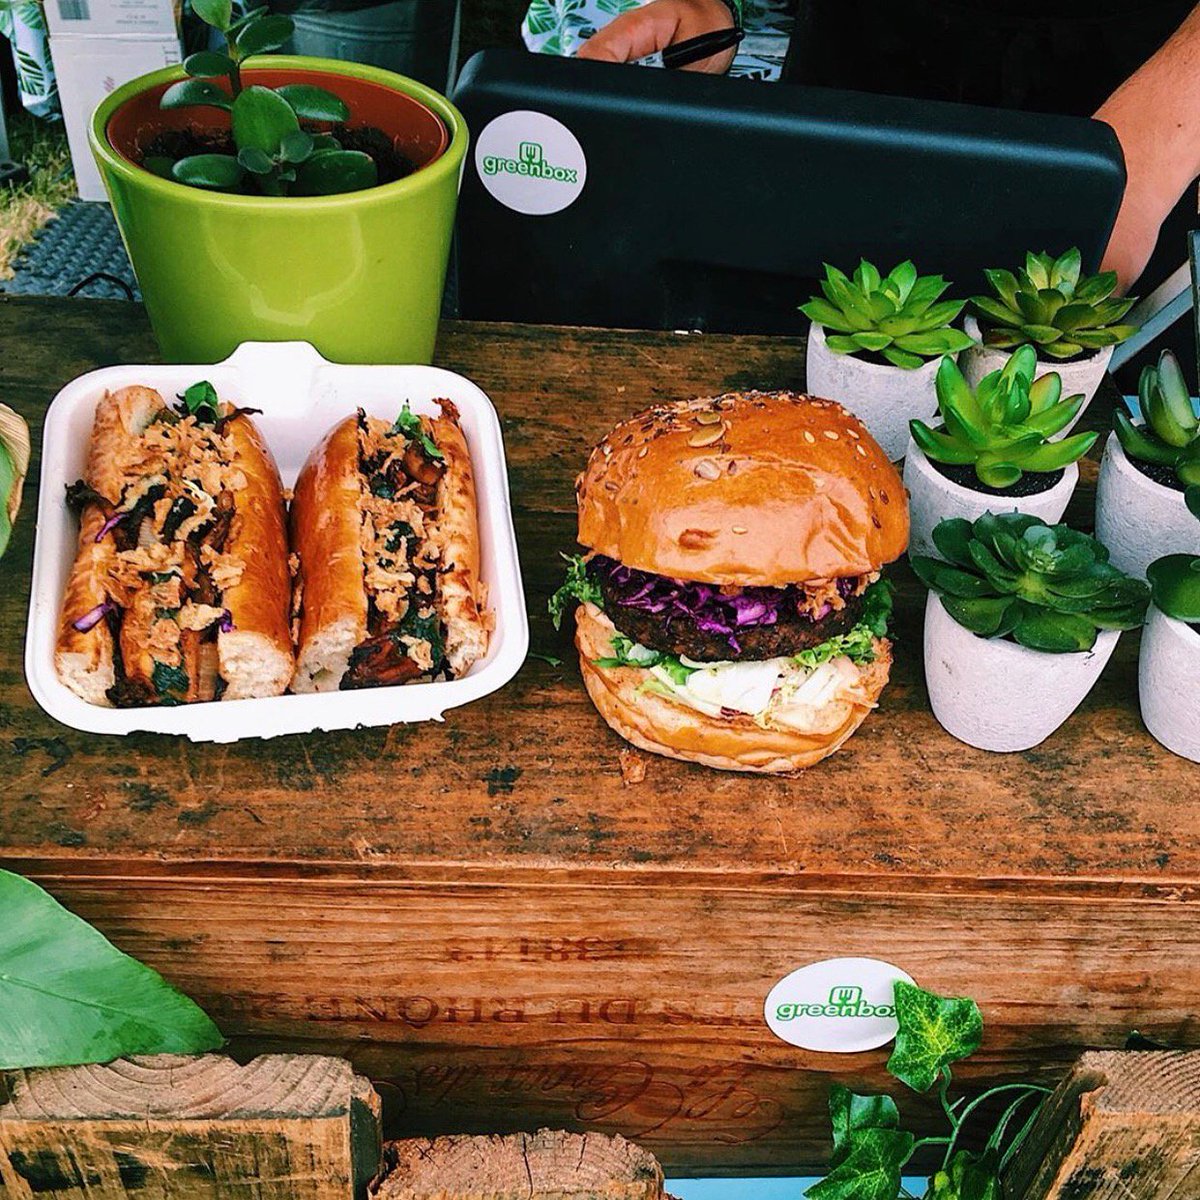 Our special guests this week are the fantastic @greenboxfoodco who are back with their delicious veggie and vegan offerings. You'll find them here this weekend from Friday 12pm - 9pm, Saturday 11am - 9pm and Sunday 12 - 6pm. #vegan #vegano #eeeeeats #foodie #food #eat #eater